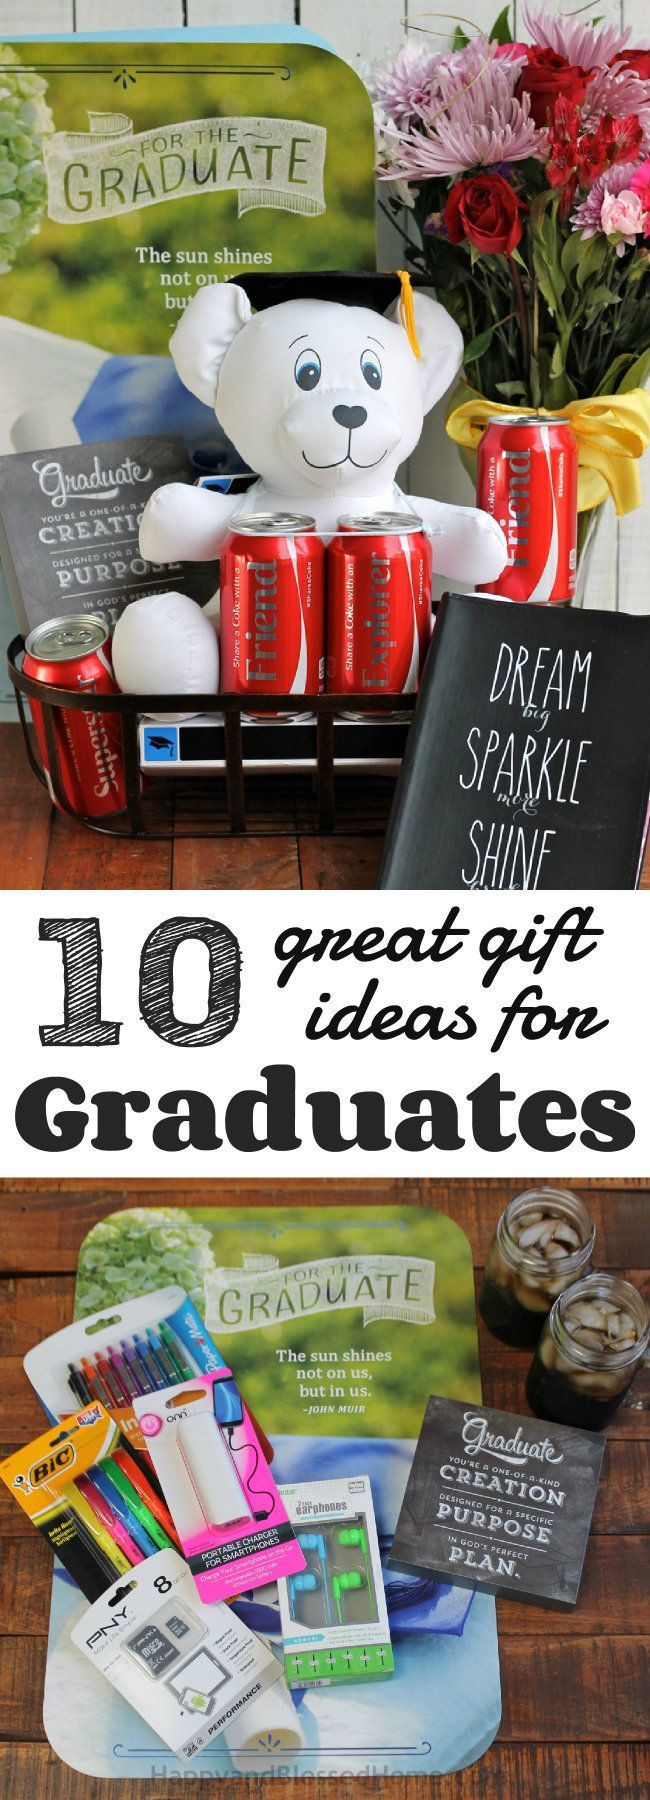 Graduation Gift Ideas For Sister
 10 Great Gift Ideas for Graduates